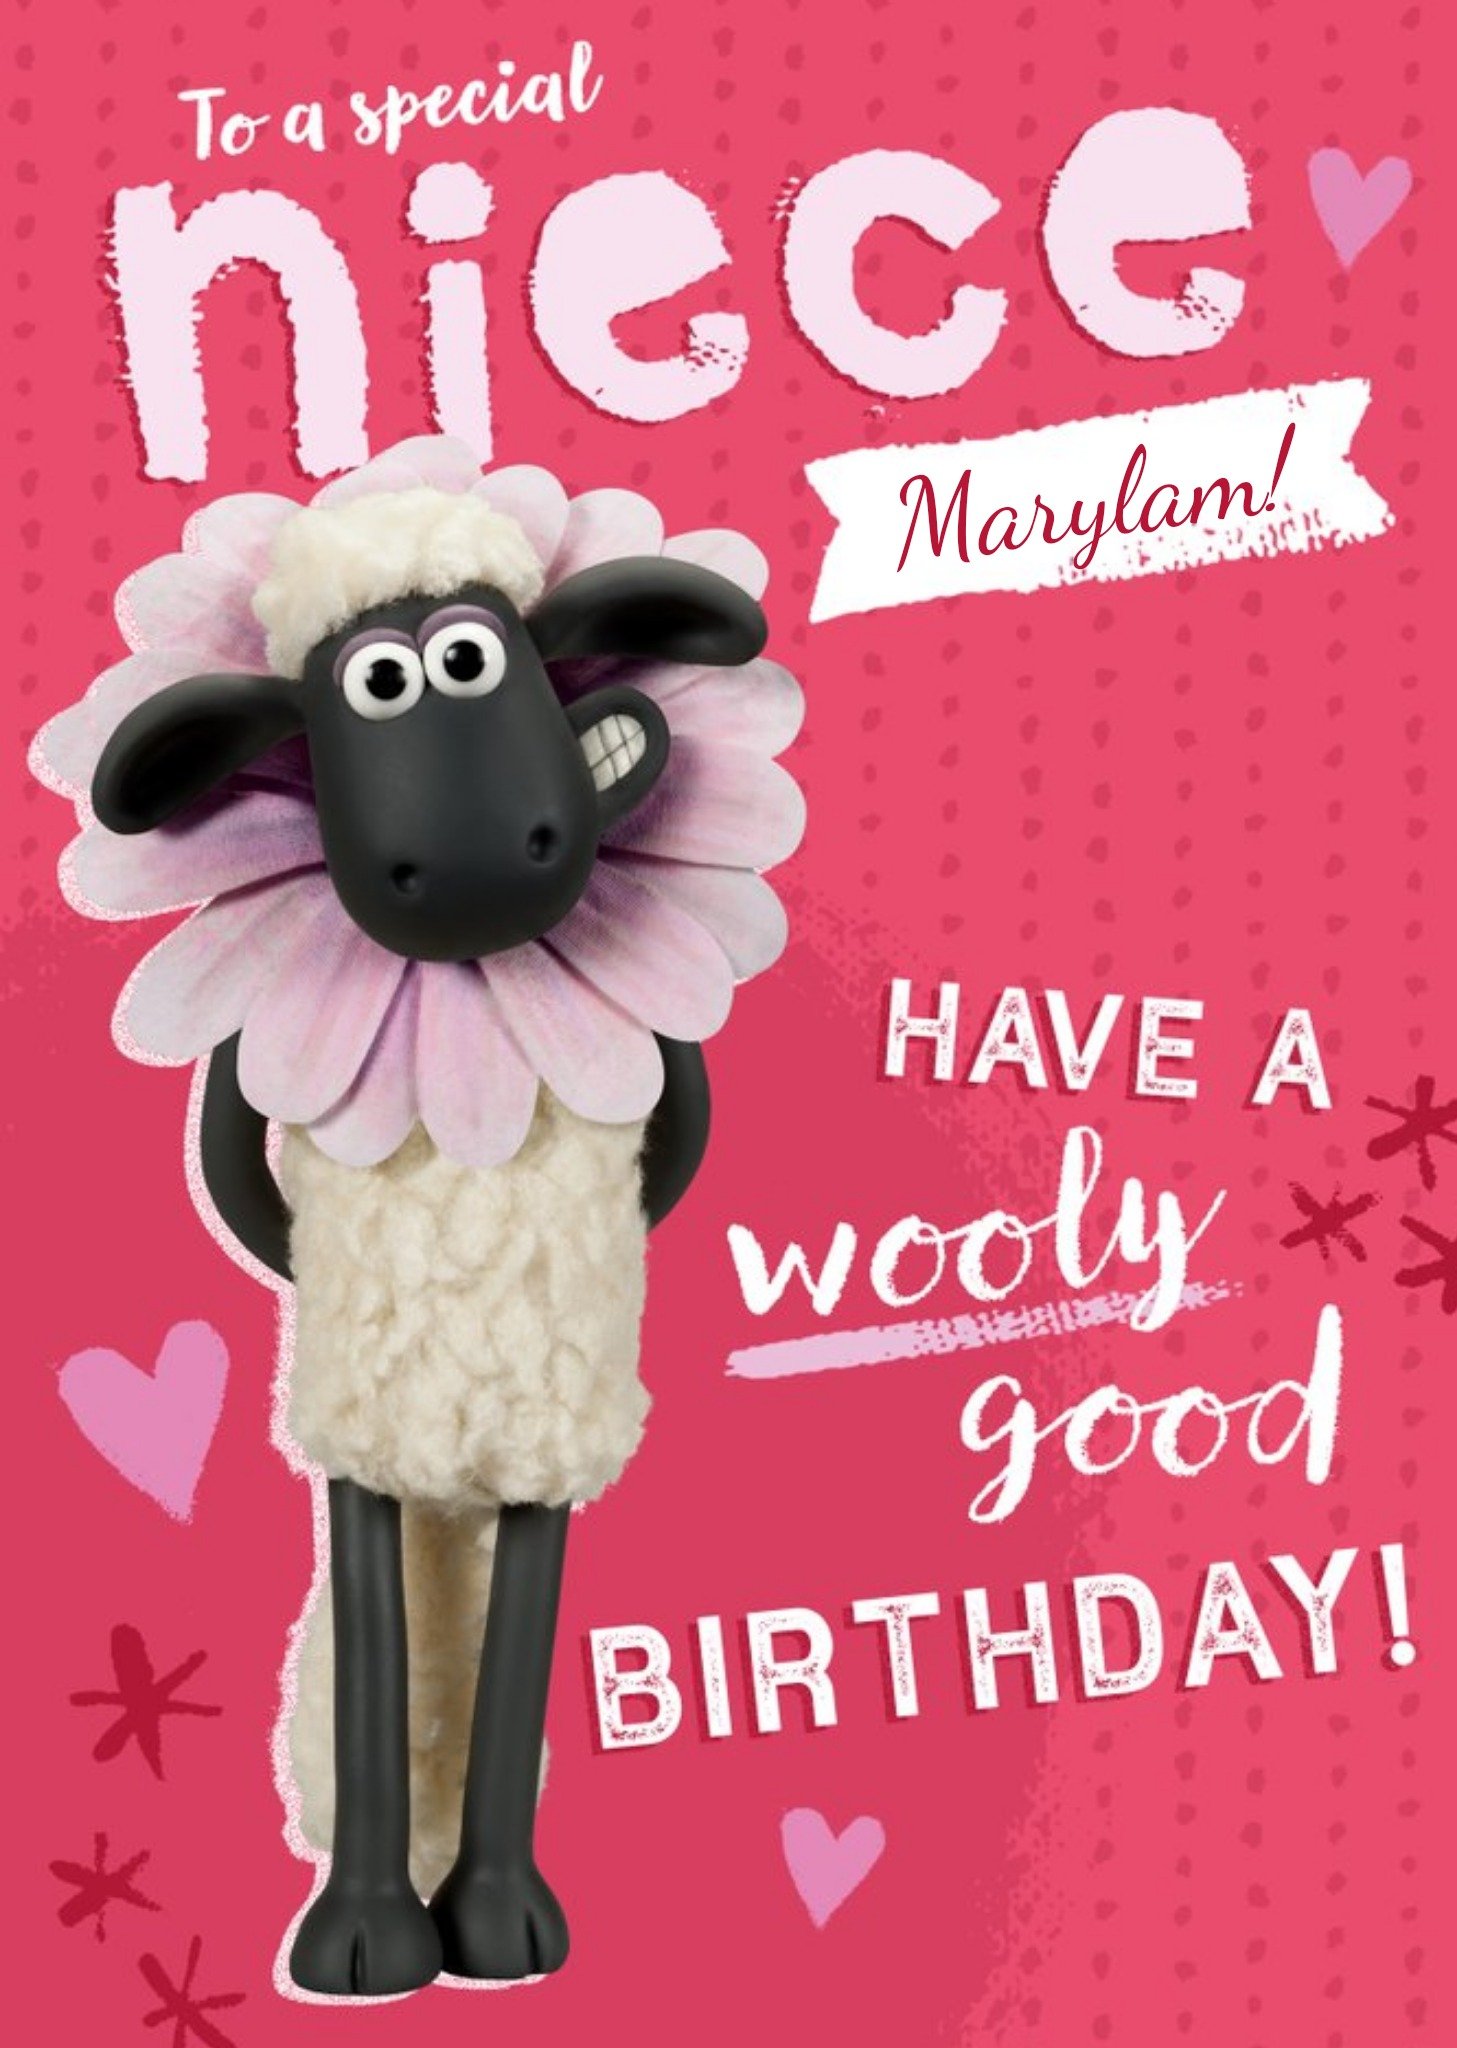 Wallace And Gromit Shaun The Sheep Special Niece Wooly Good Birthday Card, Large